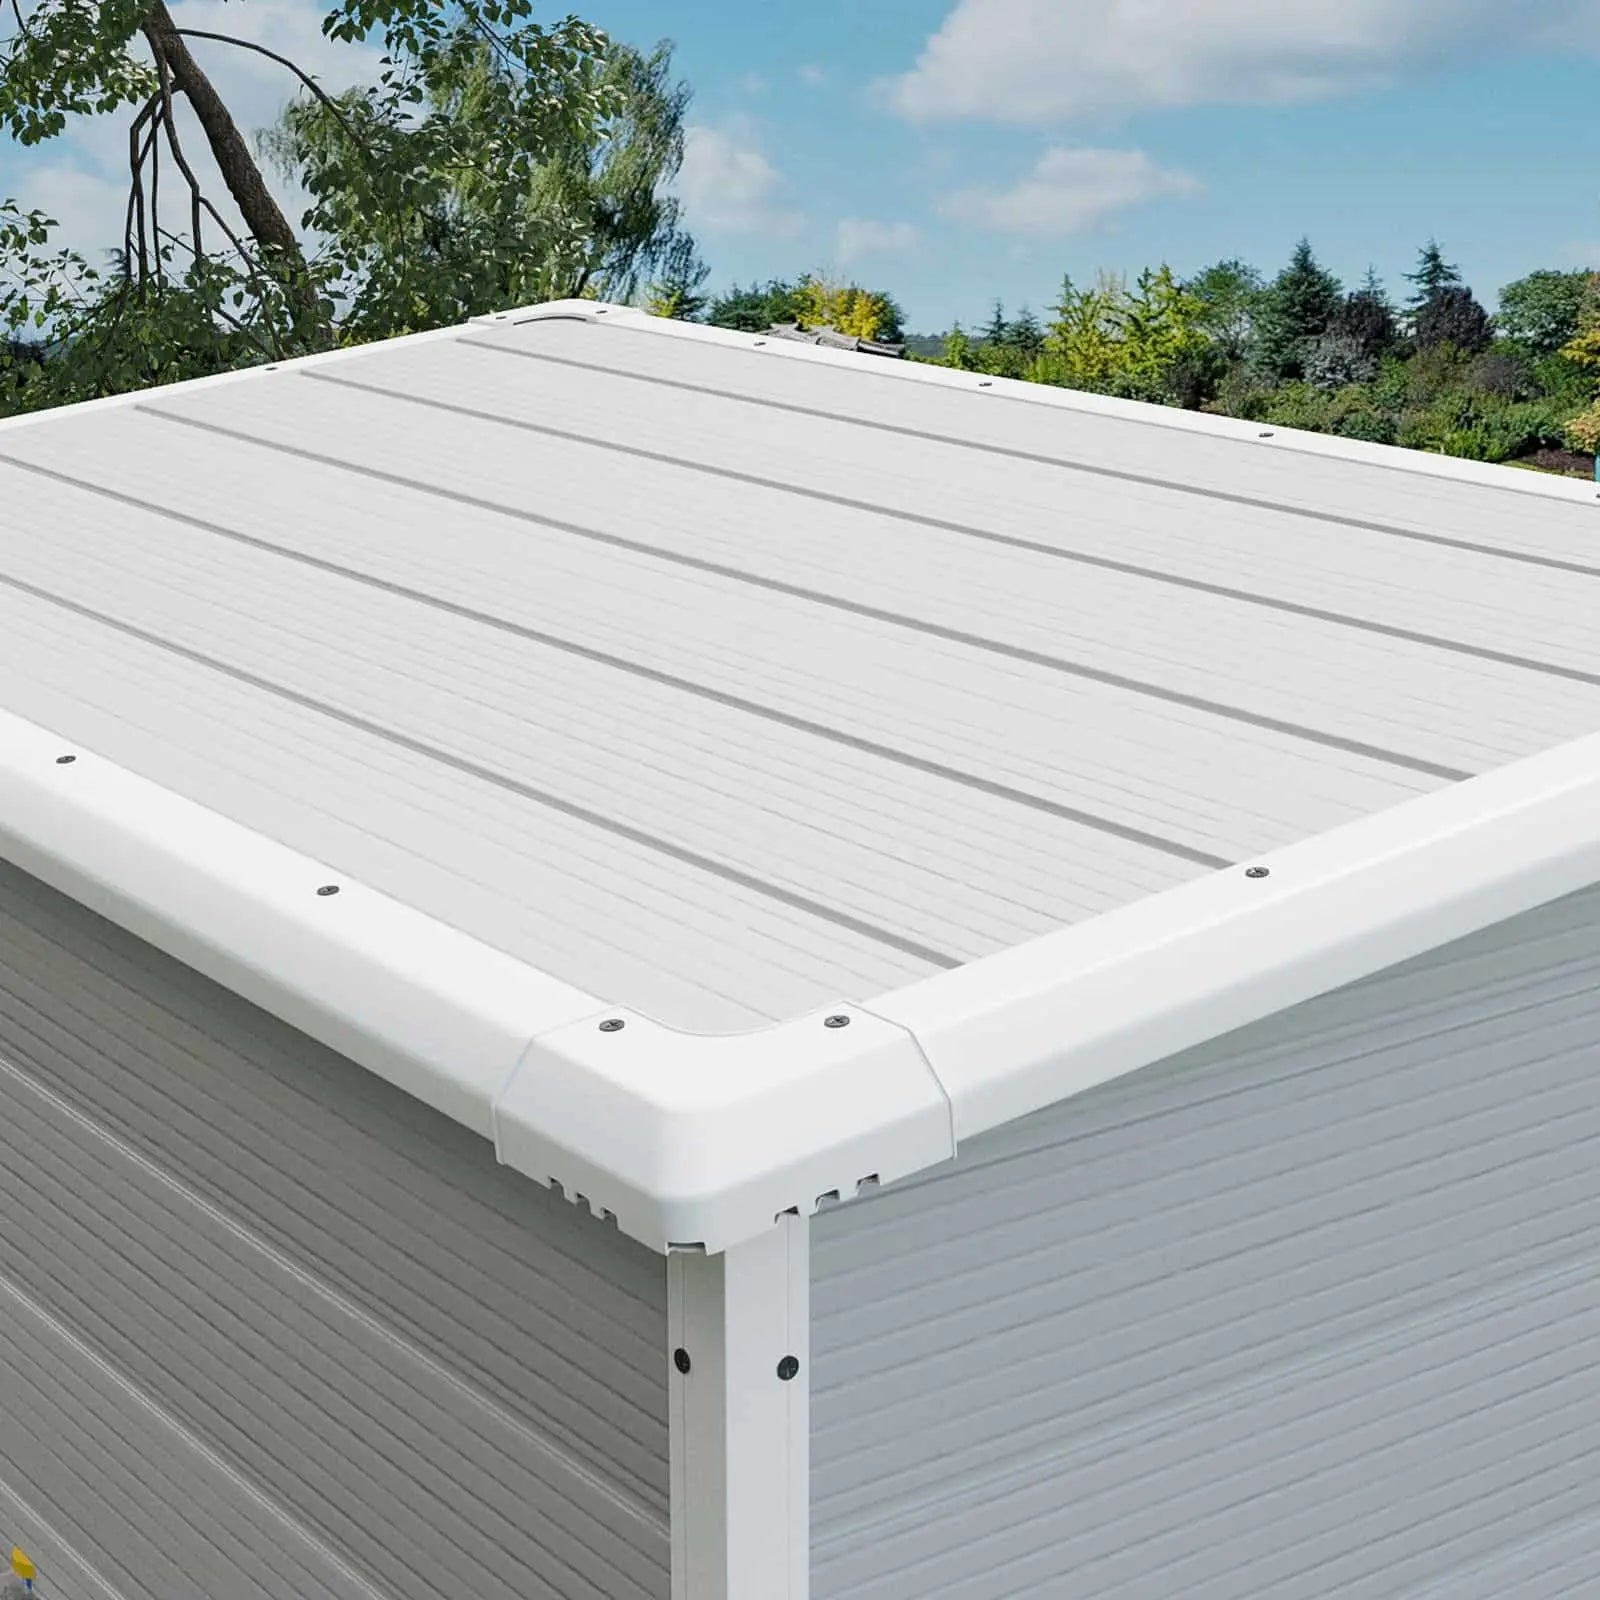 Patiowell 5x4 Plastic Shed-Roof